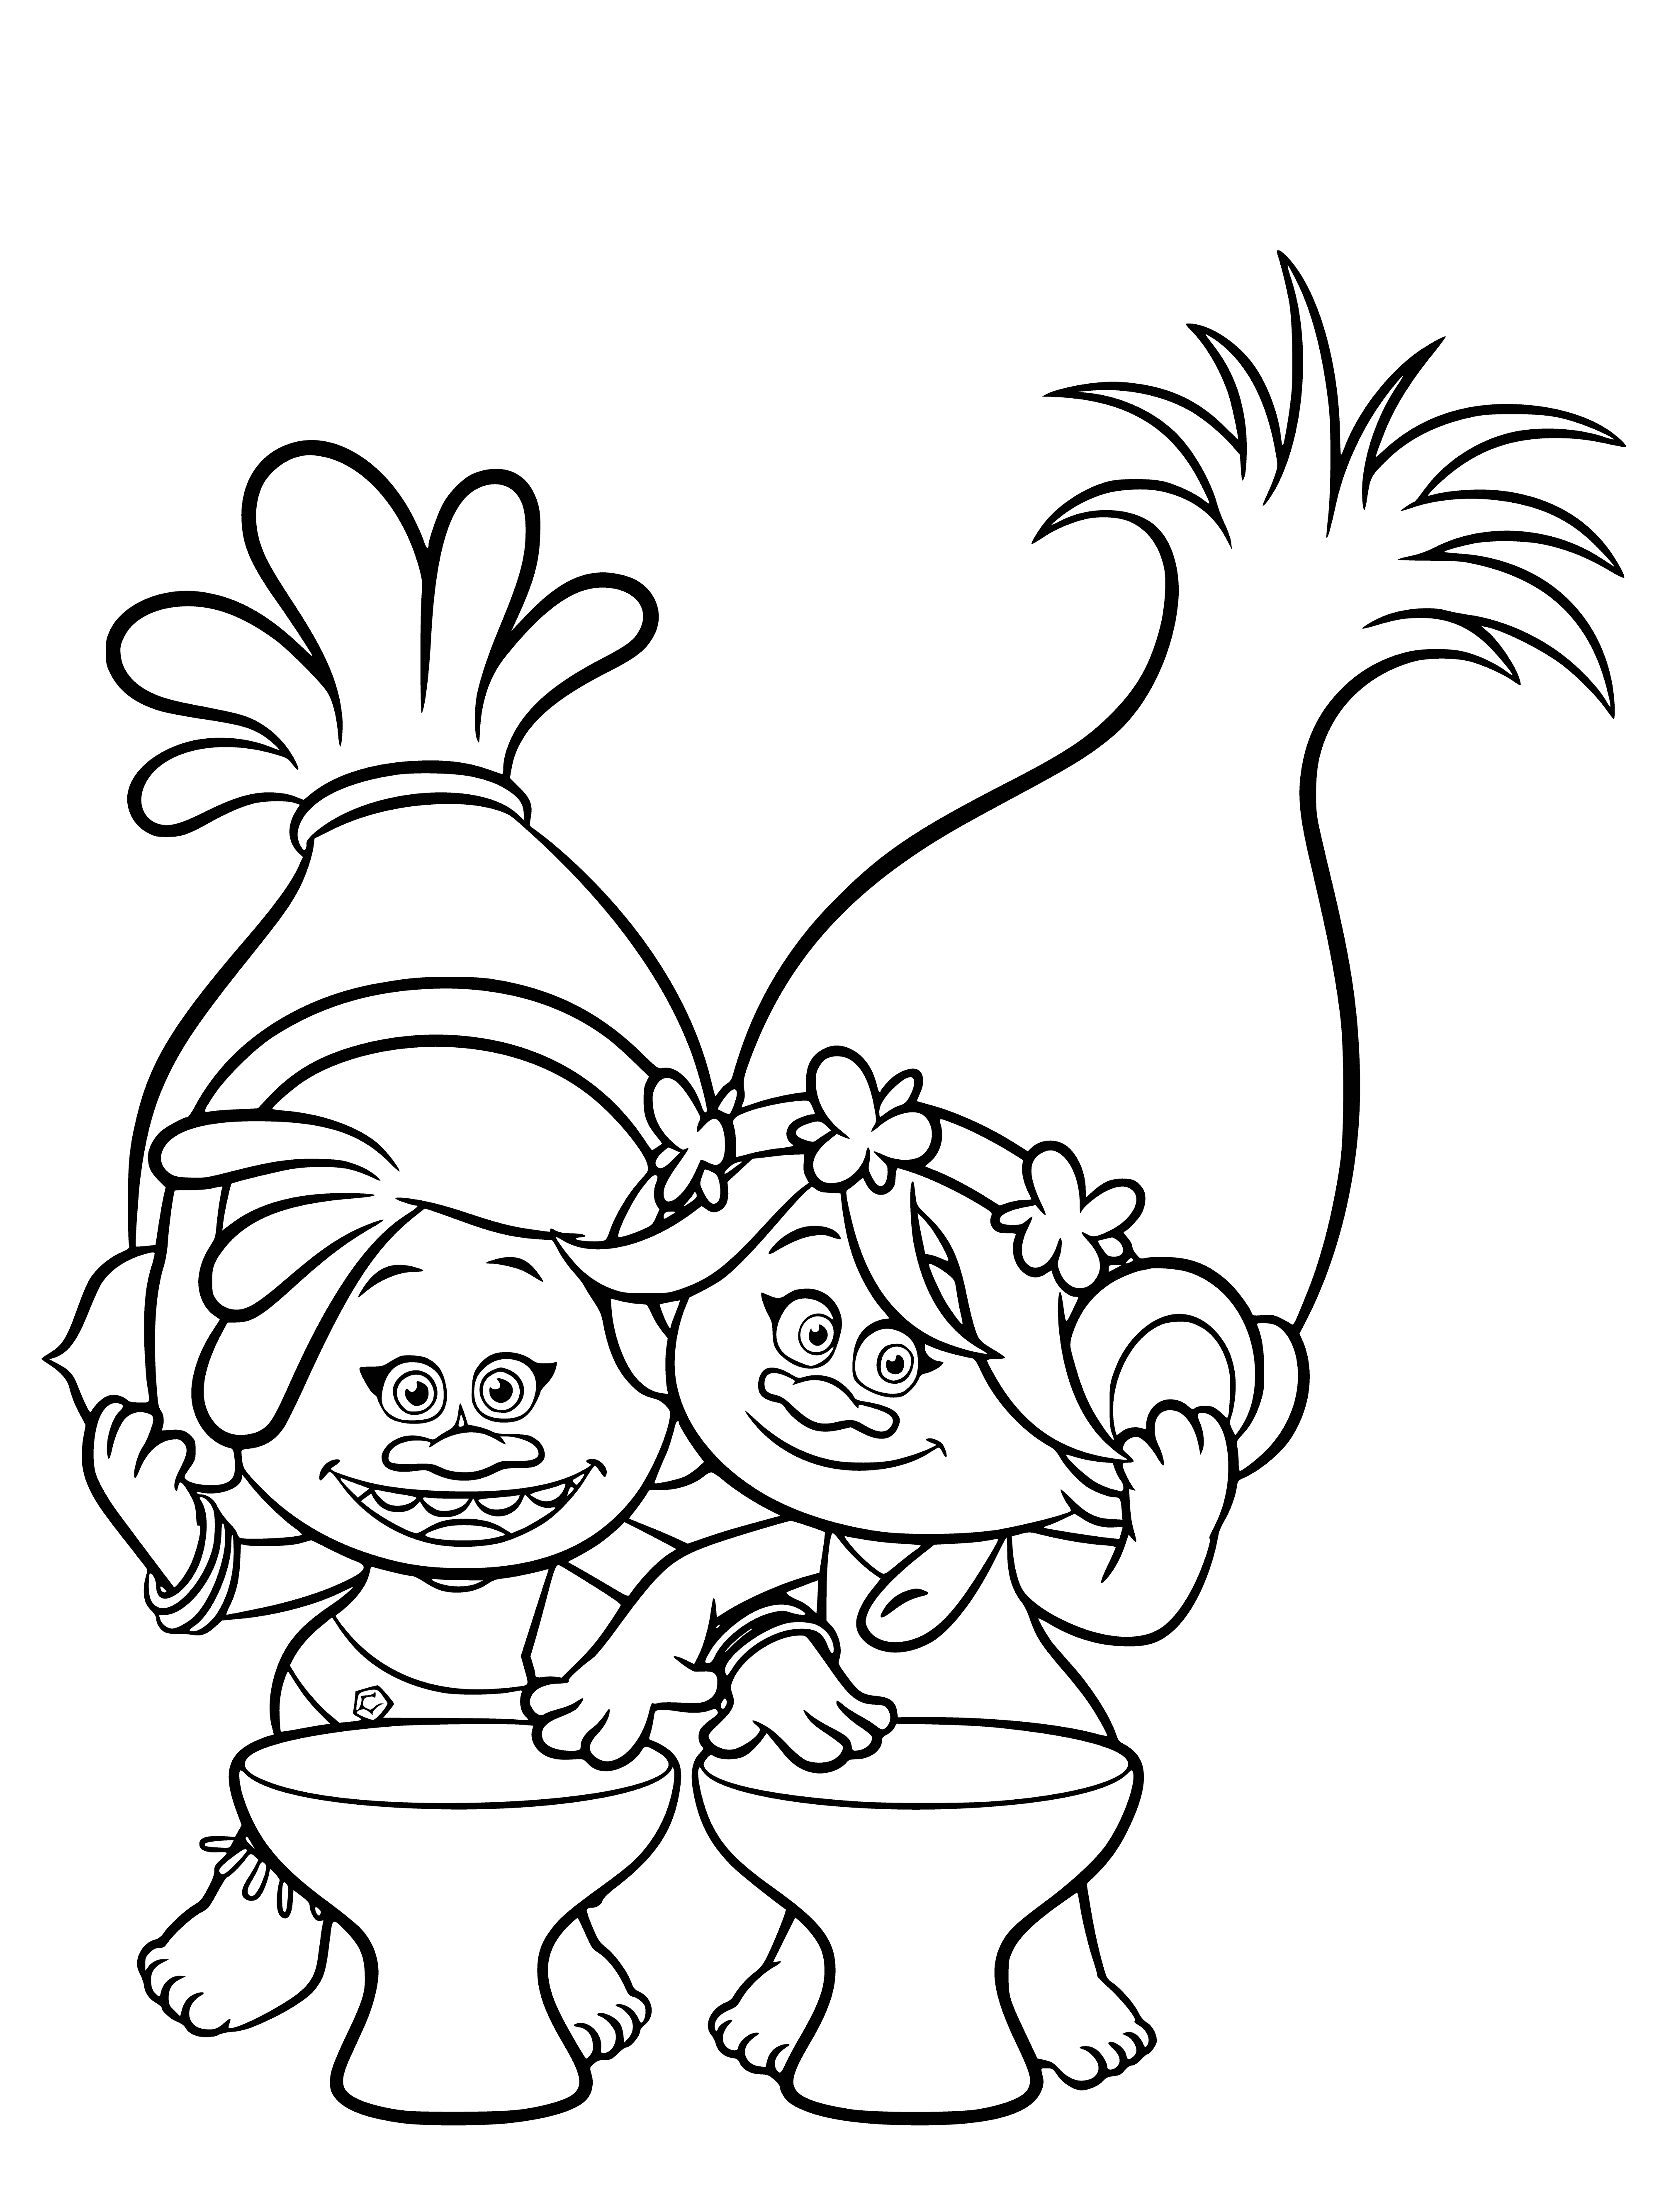 DJ Sounds and Princess Rosette coloring page